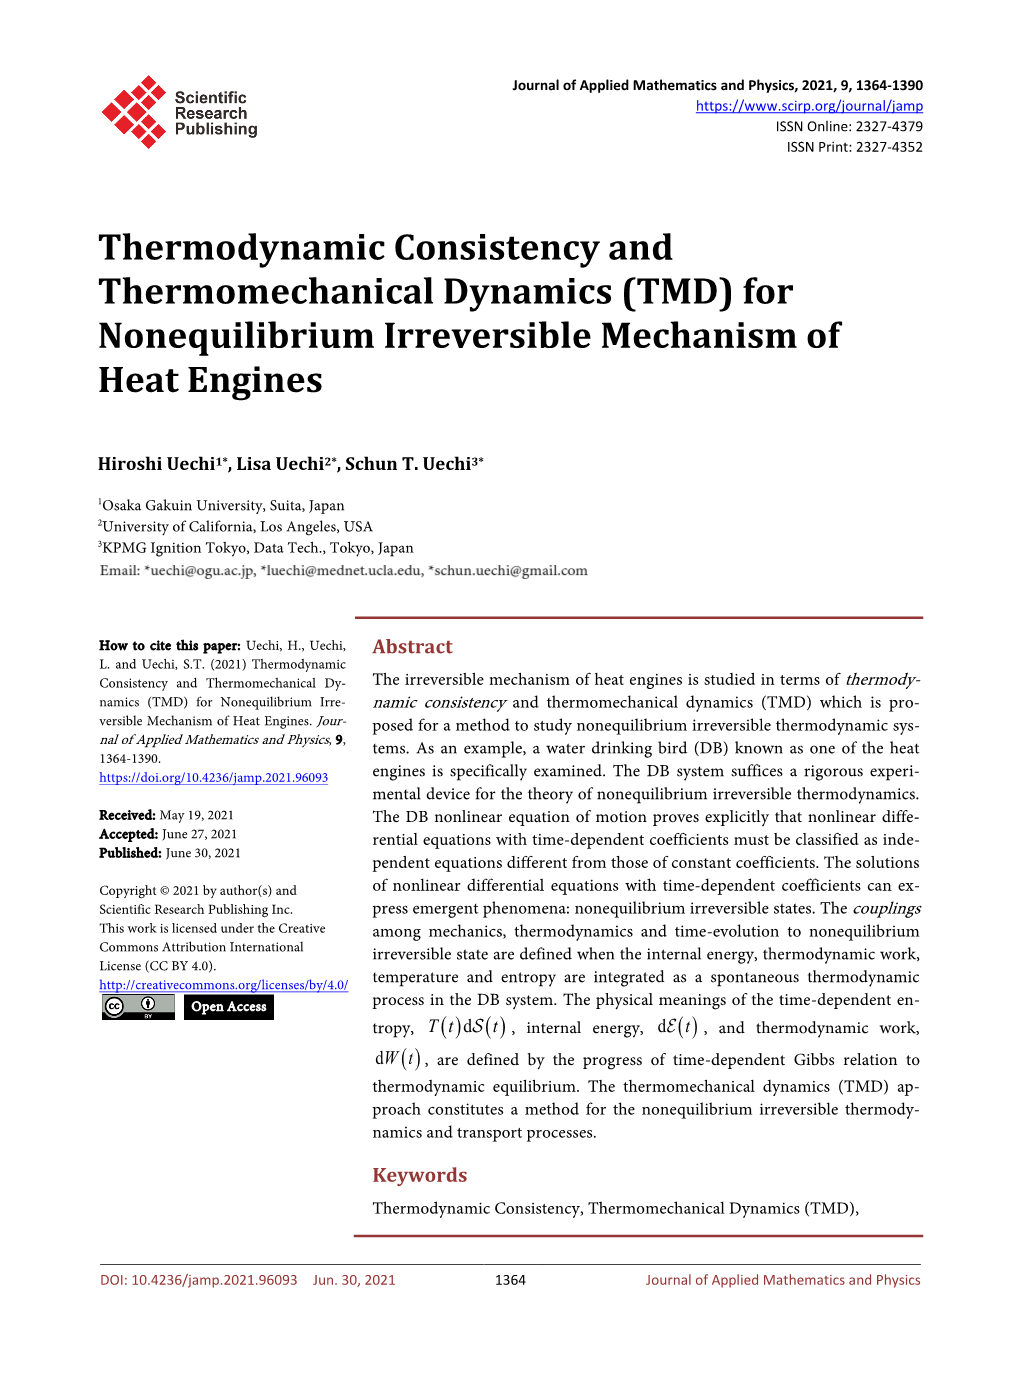 Thermodynamic Consistency and Thermomechanical Dynamics (TMD) for Nonequilibrium Irreversible Mechanism of Heat Engines